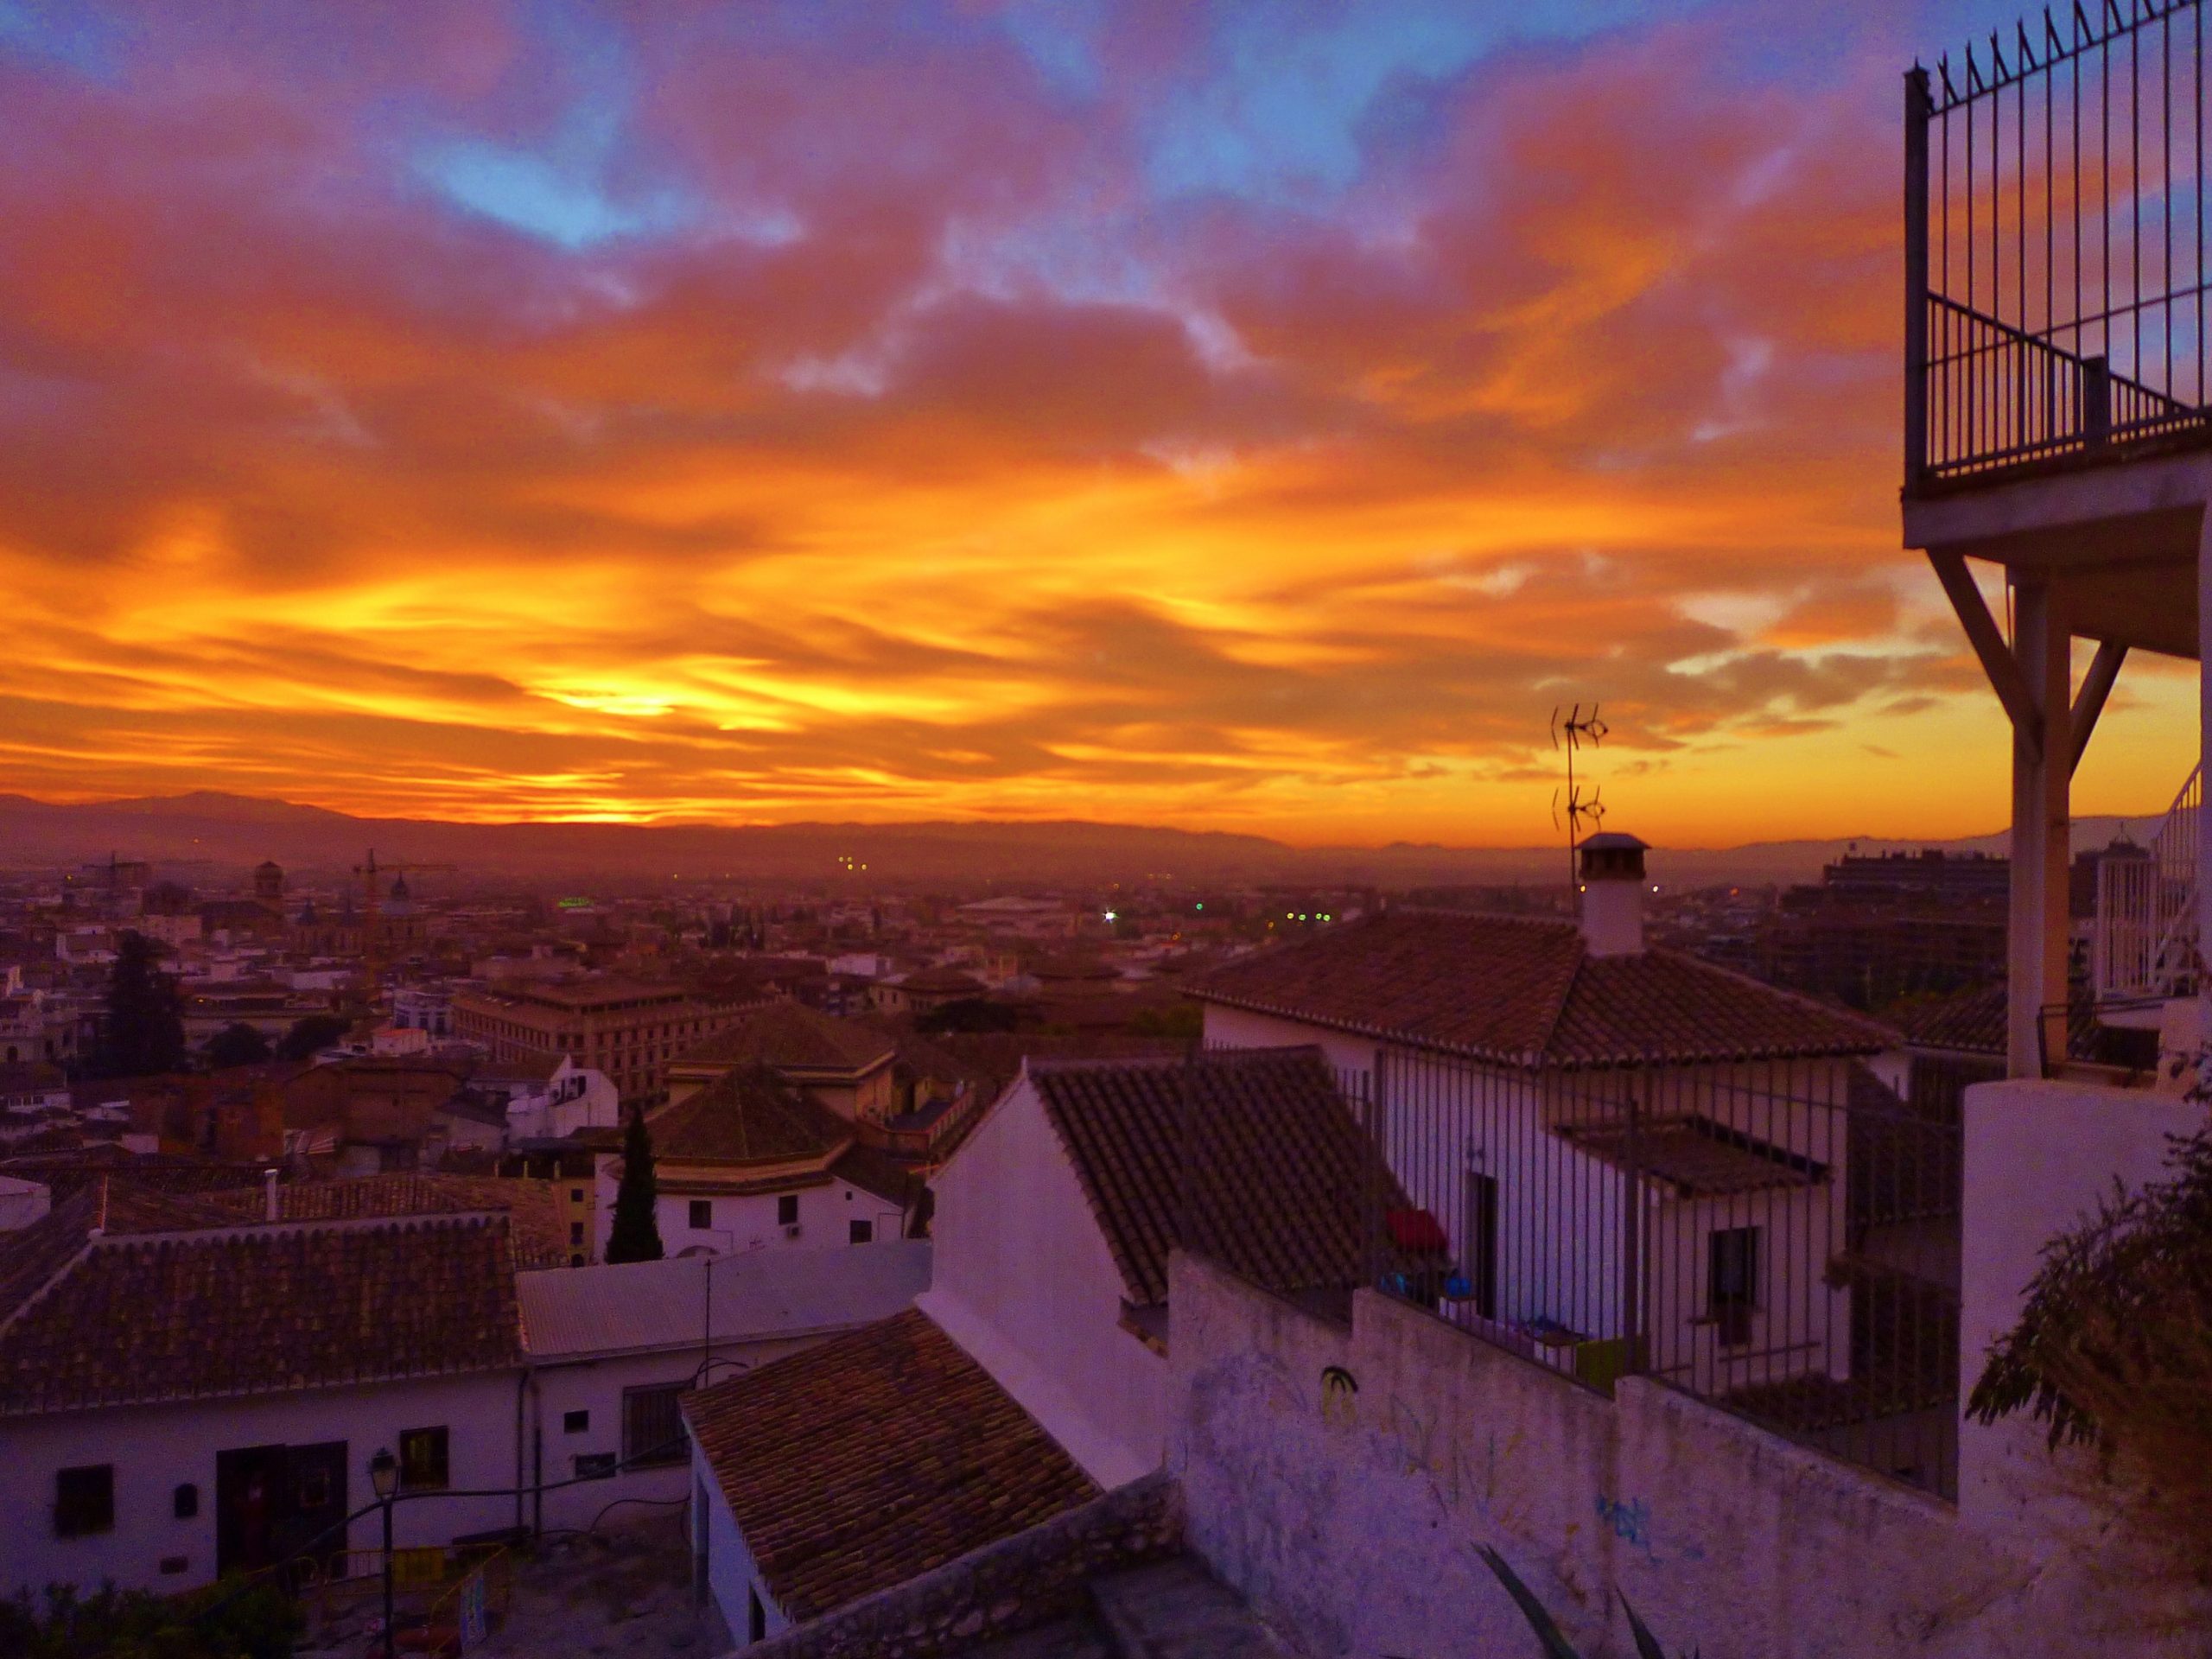 Where to see sunset in granada